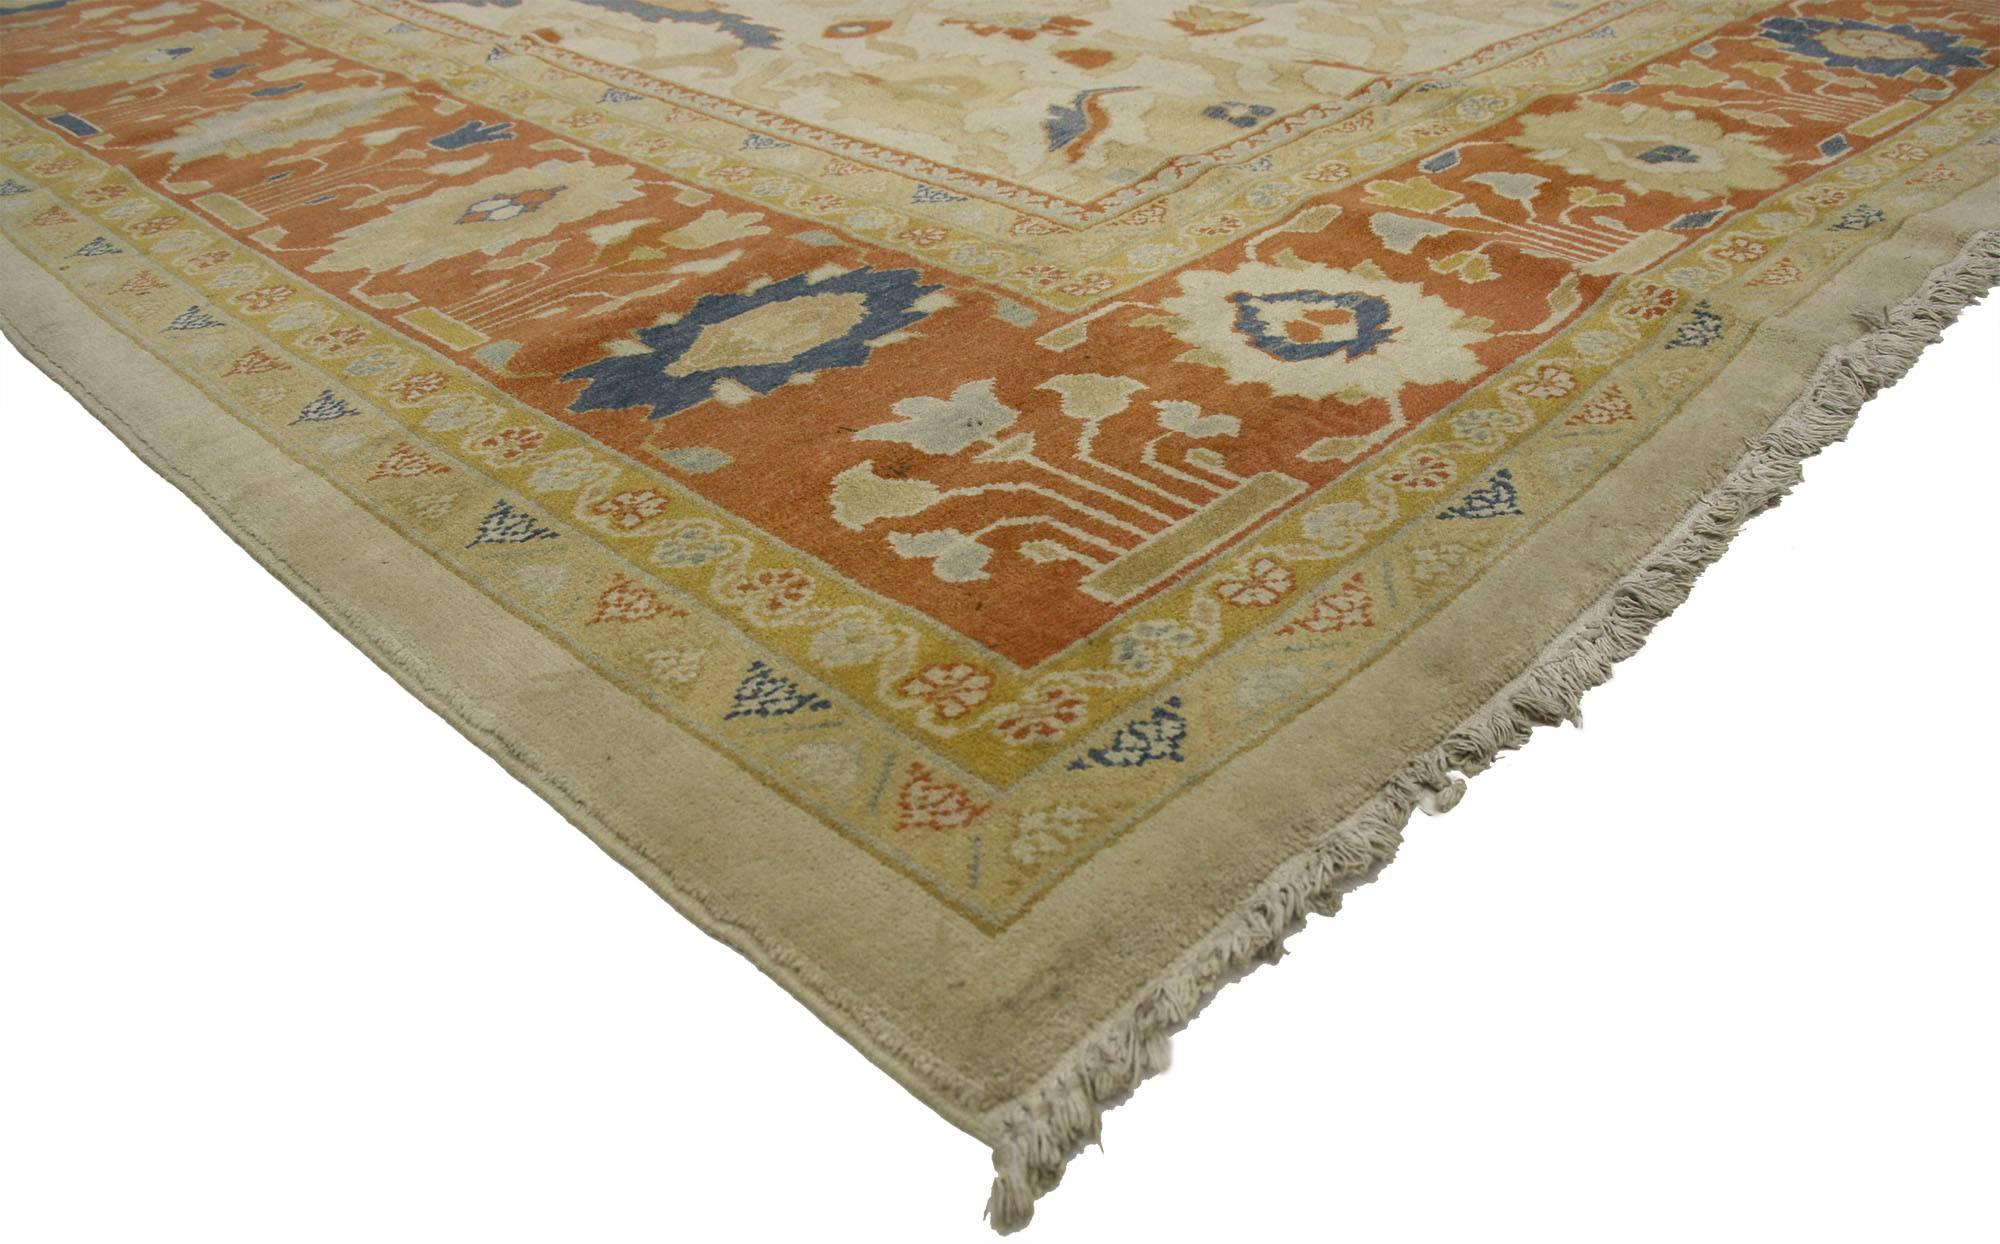 77117 Vintage Persian Mahal Rug with Mediterranean Style and Curled Sickle Leaf Design 10'03 x 14'02. ​This hand knotted wool vintage Persian Mahal rug beautifully showcases Mediterranean Style and Curled Sickle Leaf design. The lively all-over